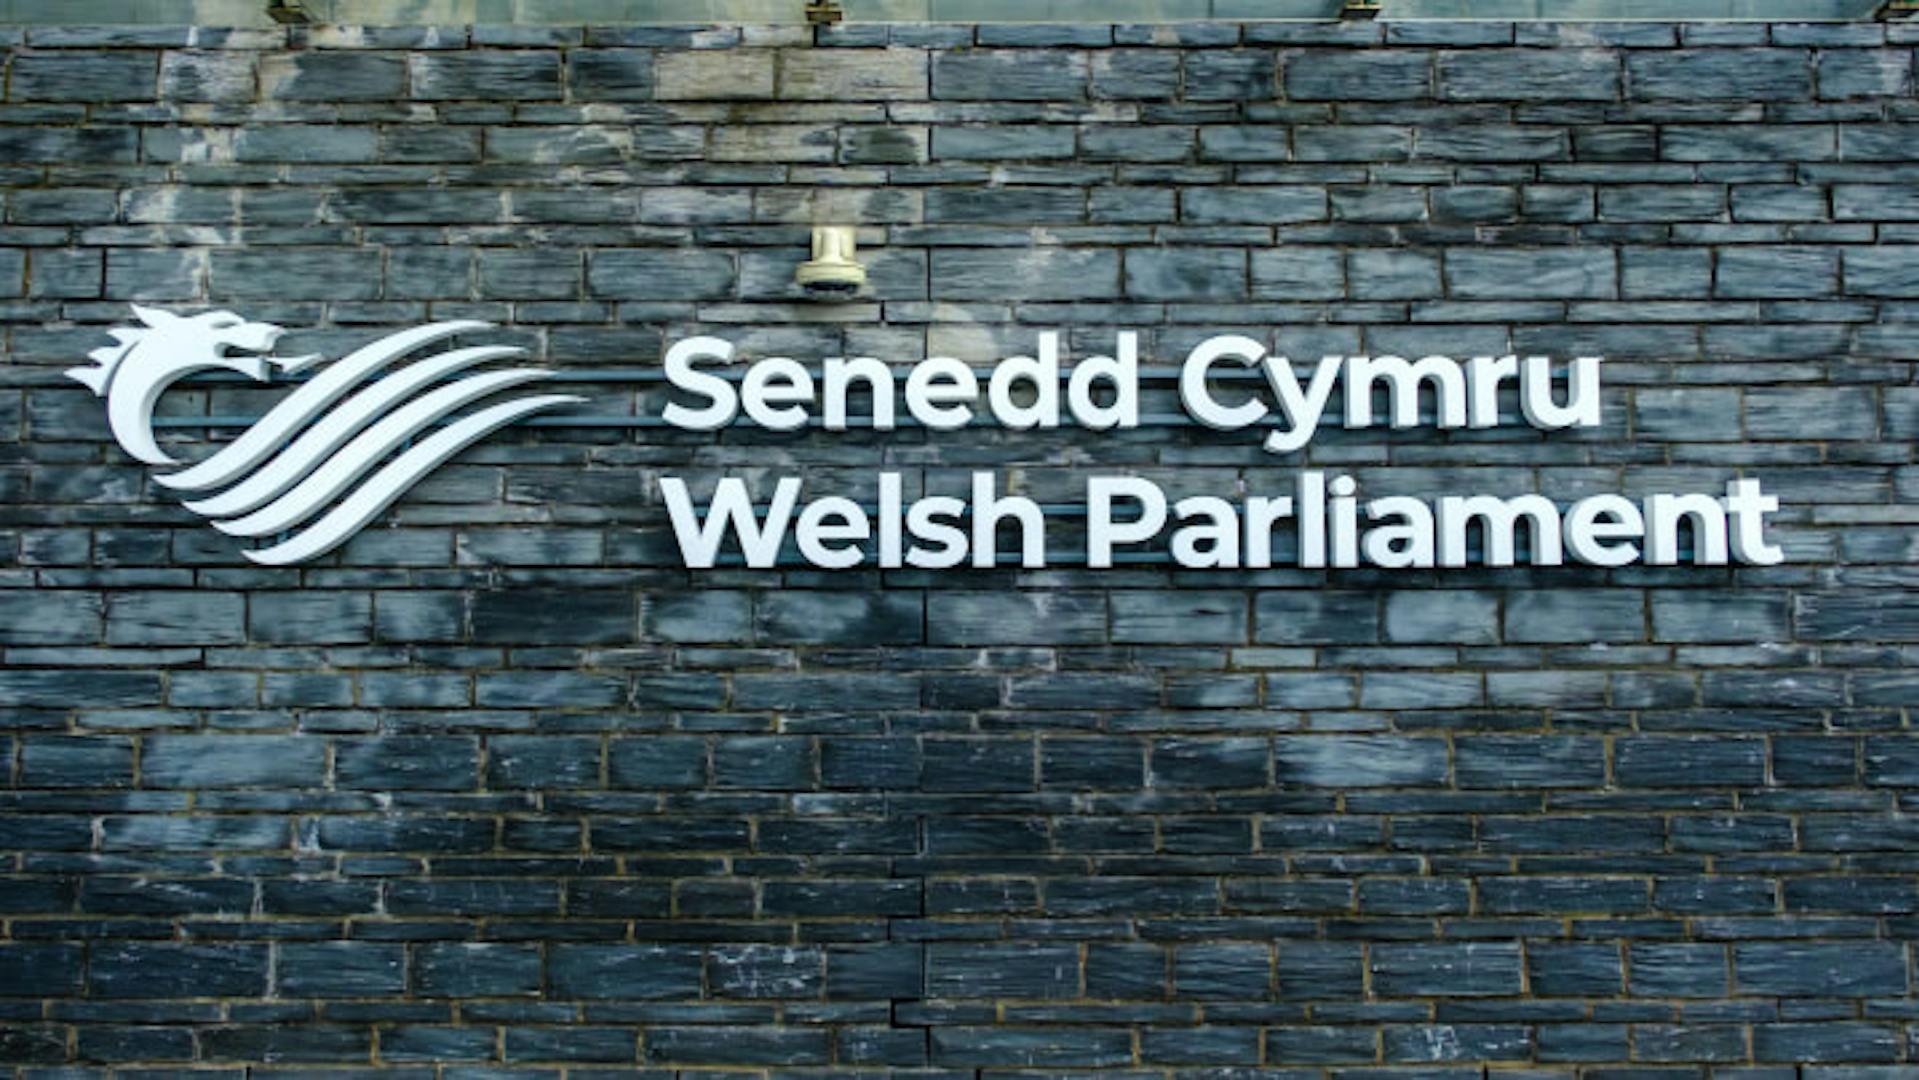 Thanks to Welsh-language preservation activists, there is now bilingual signage throughout Wales.